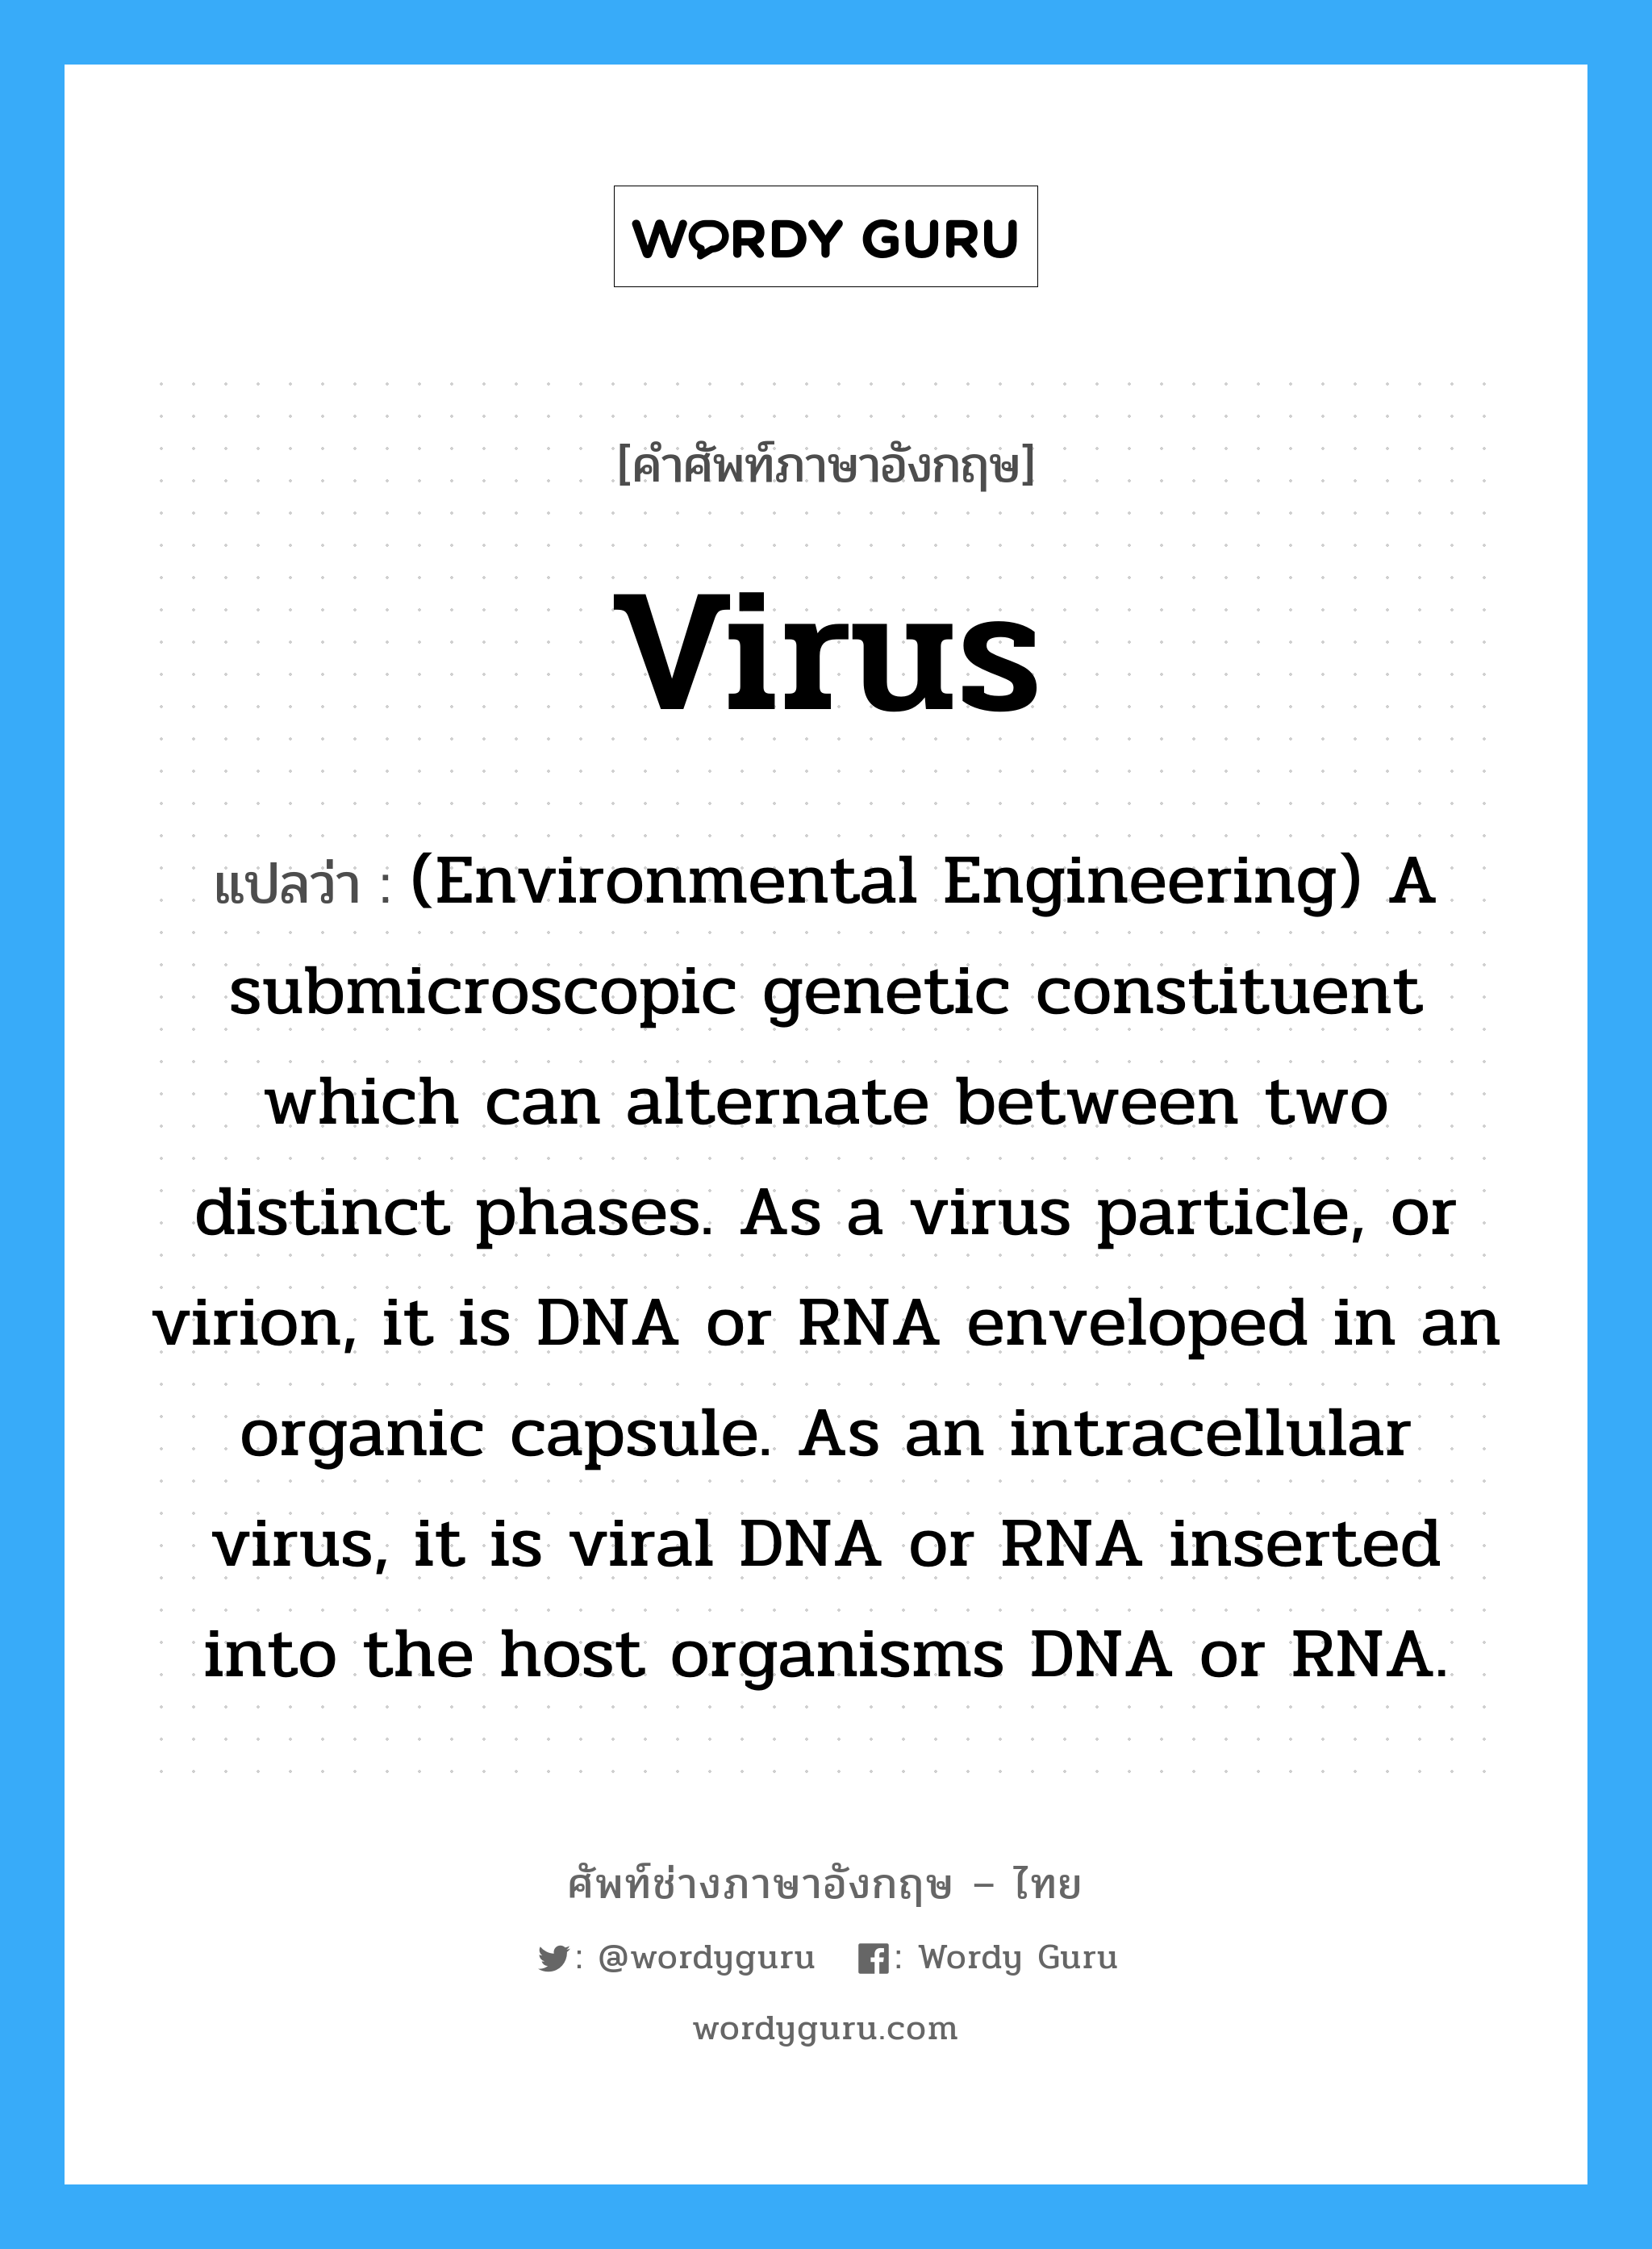 (Environmental Engineering) A submicroscopic genetic constituent which can alternate between two distinct phases. As a virus particle, or virion, it is DNA or RNA enveloped in an organic capsule. As an intracellular virus, it is viral DNA or RNA inserted into the host organisms DNA or RNA. ภาษาอังกฤษ?, คำศัพท์ช่างภาษาอังกฤษ - ไทย (Environmental Engineering) A submicroscopic genetic constituent which can alternate between two distinct phases. As a virus particle, or virion, it is DNA or RNA enveloped in an organic capsule. As an intracellular virus, it is viral DNA or RNA inserted into the host organisms DNA or RNA. คำศัพท์ภาษาอังกฤษ (Environmental Engineering) A submicroscopic genetic constituent which can alternate between two distinct phases. As a virus particle, or virion, it is DNA or RNA enveloped in an organic capsule. As an intracellular virus, it is viral DNA or RNA inserted into the host organisms DNA or RNA. แปลว่า Virus